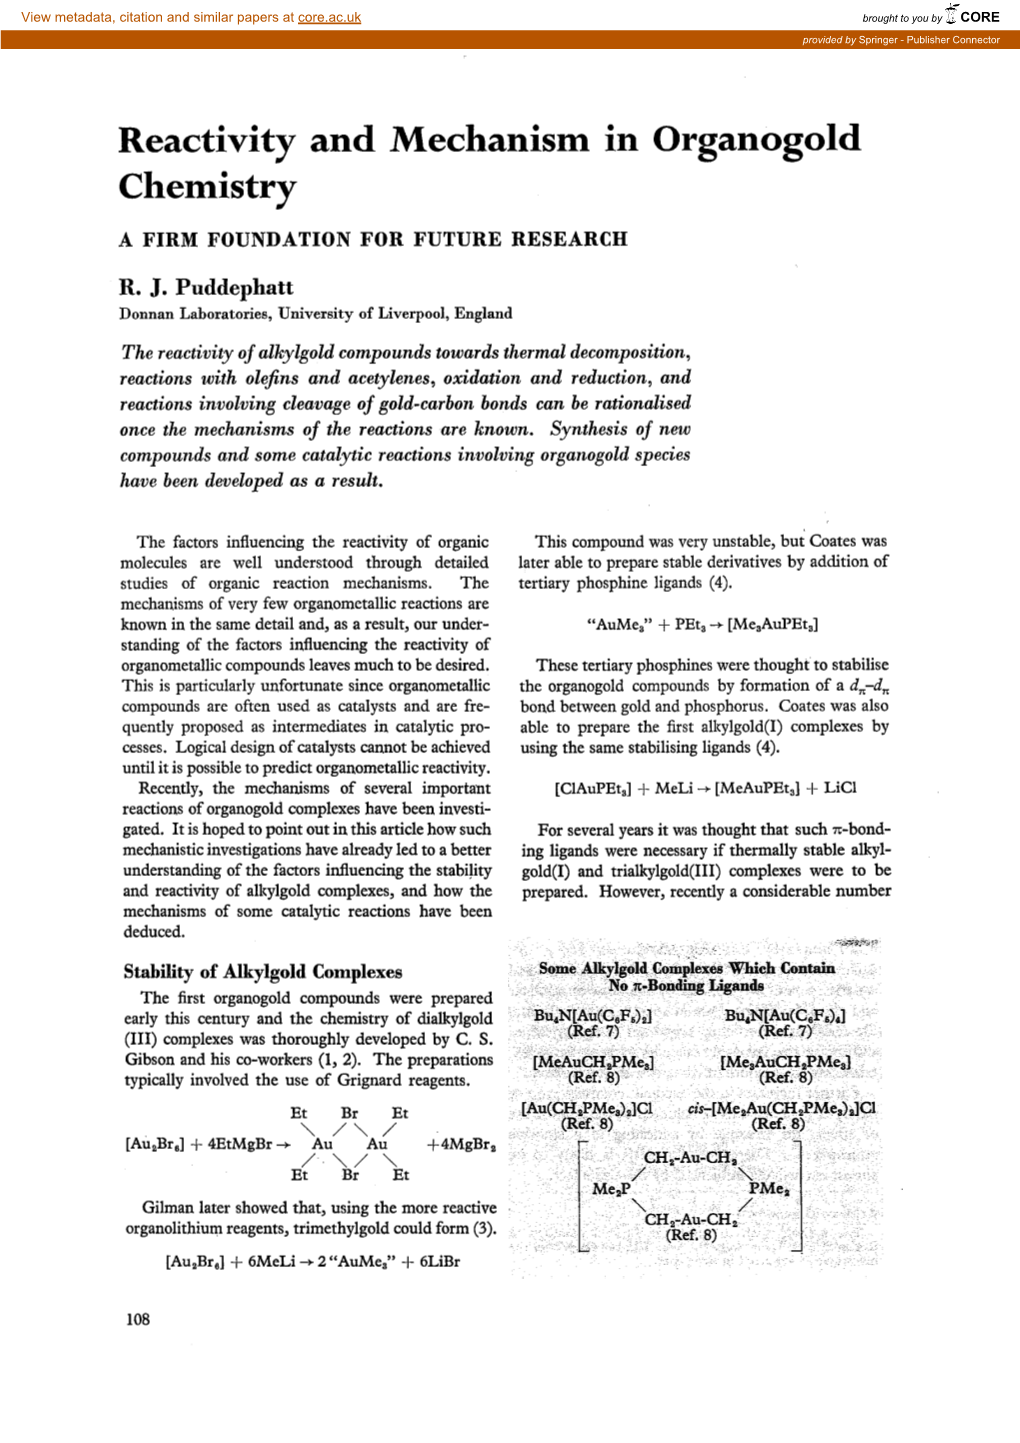 Reactivity and Mechanism in Organogold Chemistry